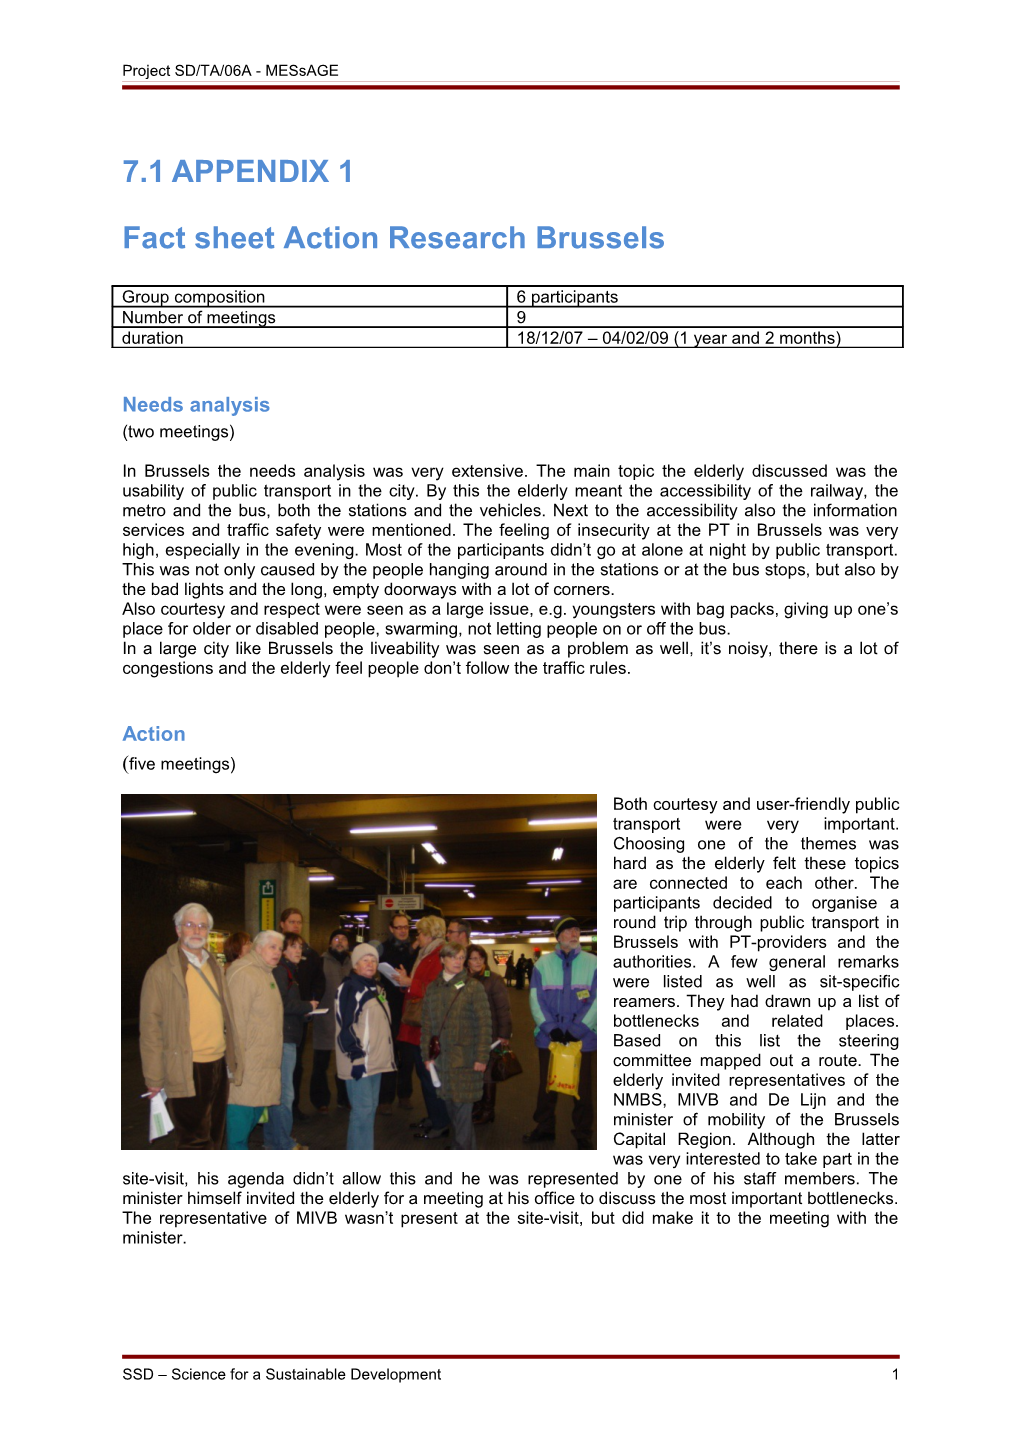 Fact Sheet Action Research Brussels